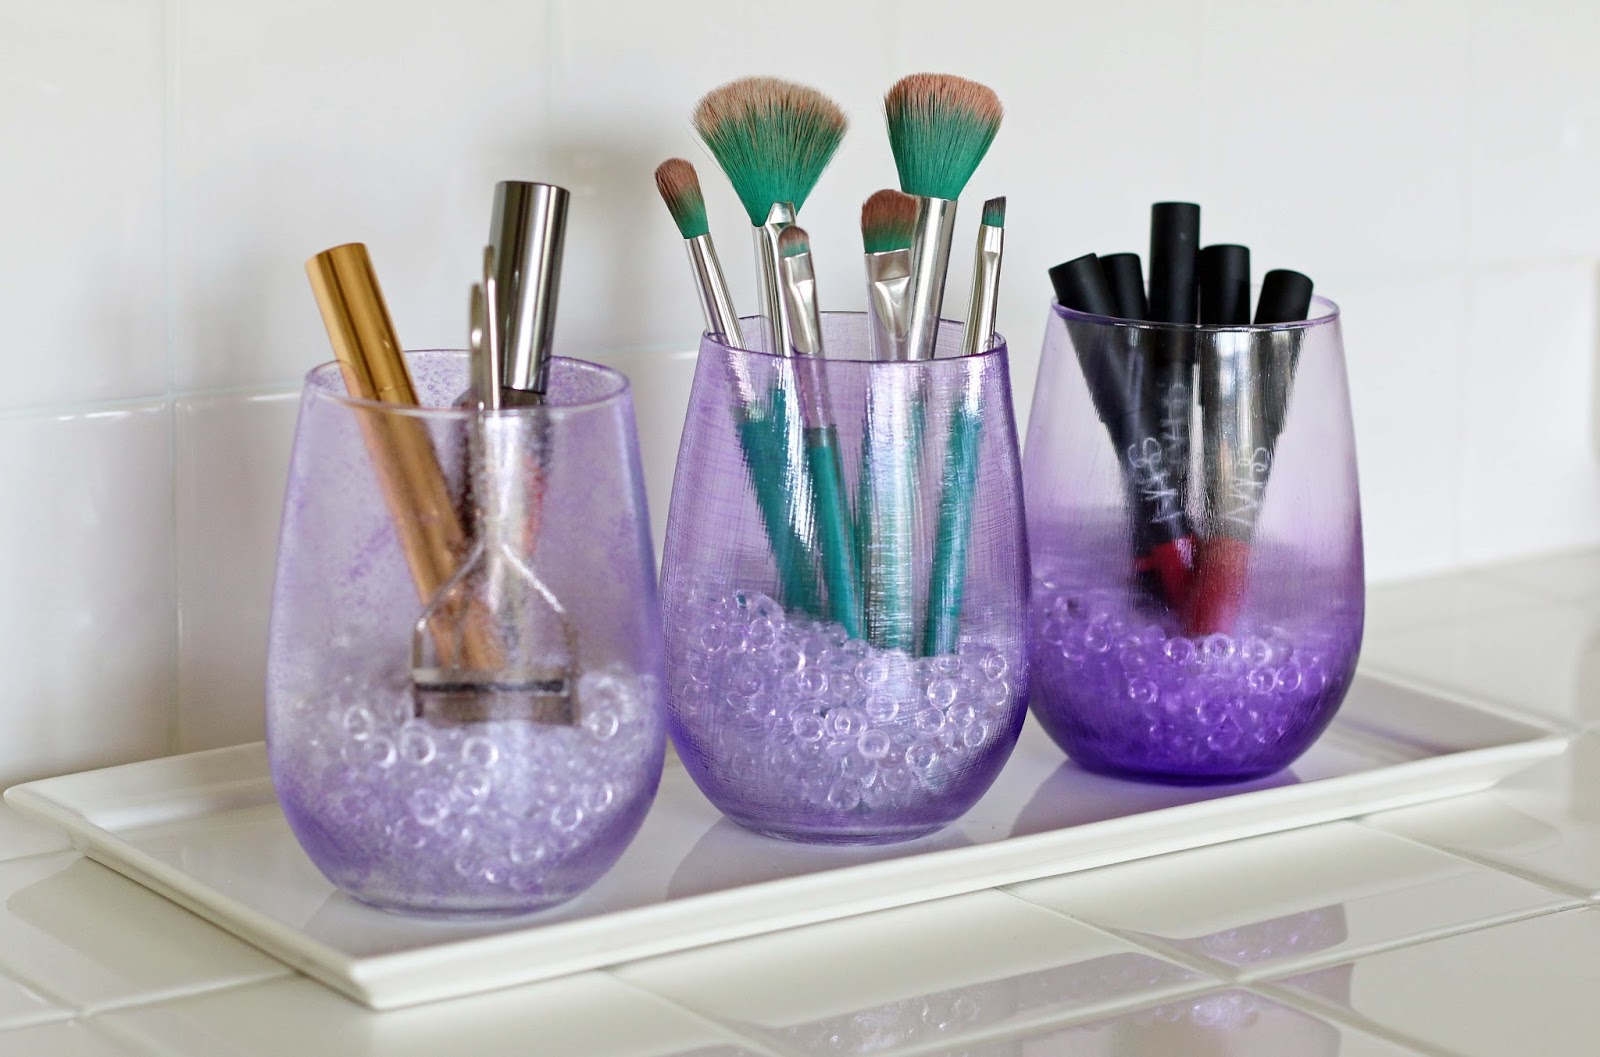 Three Purple Mod Podge glasses are used for makeup storage and organizing.